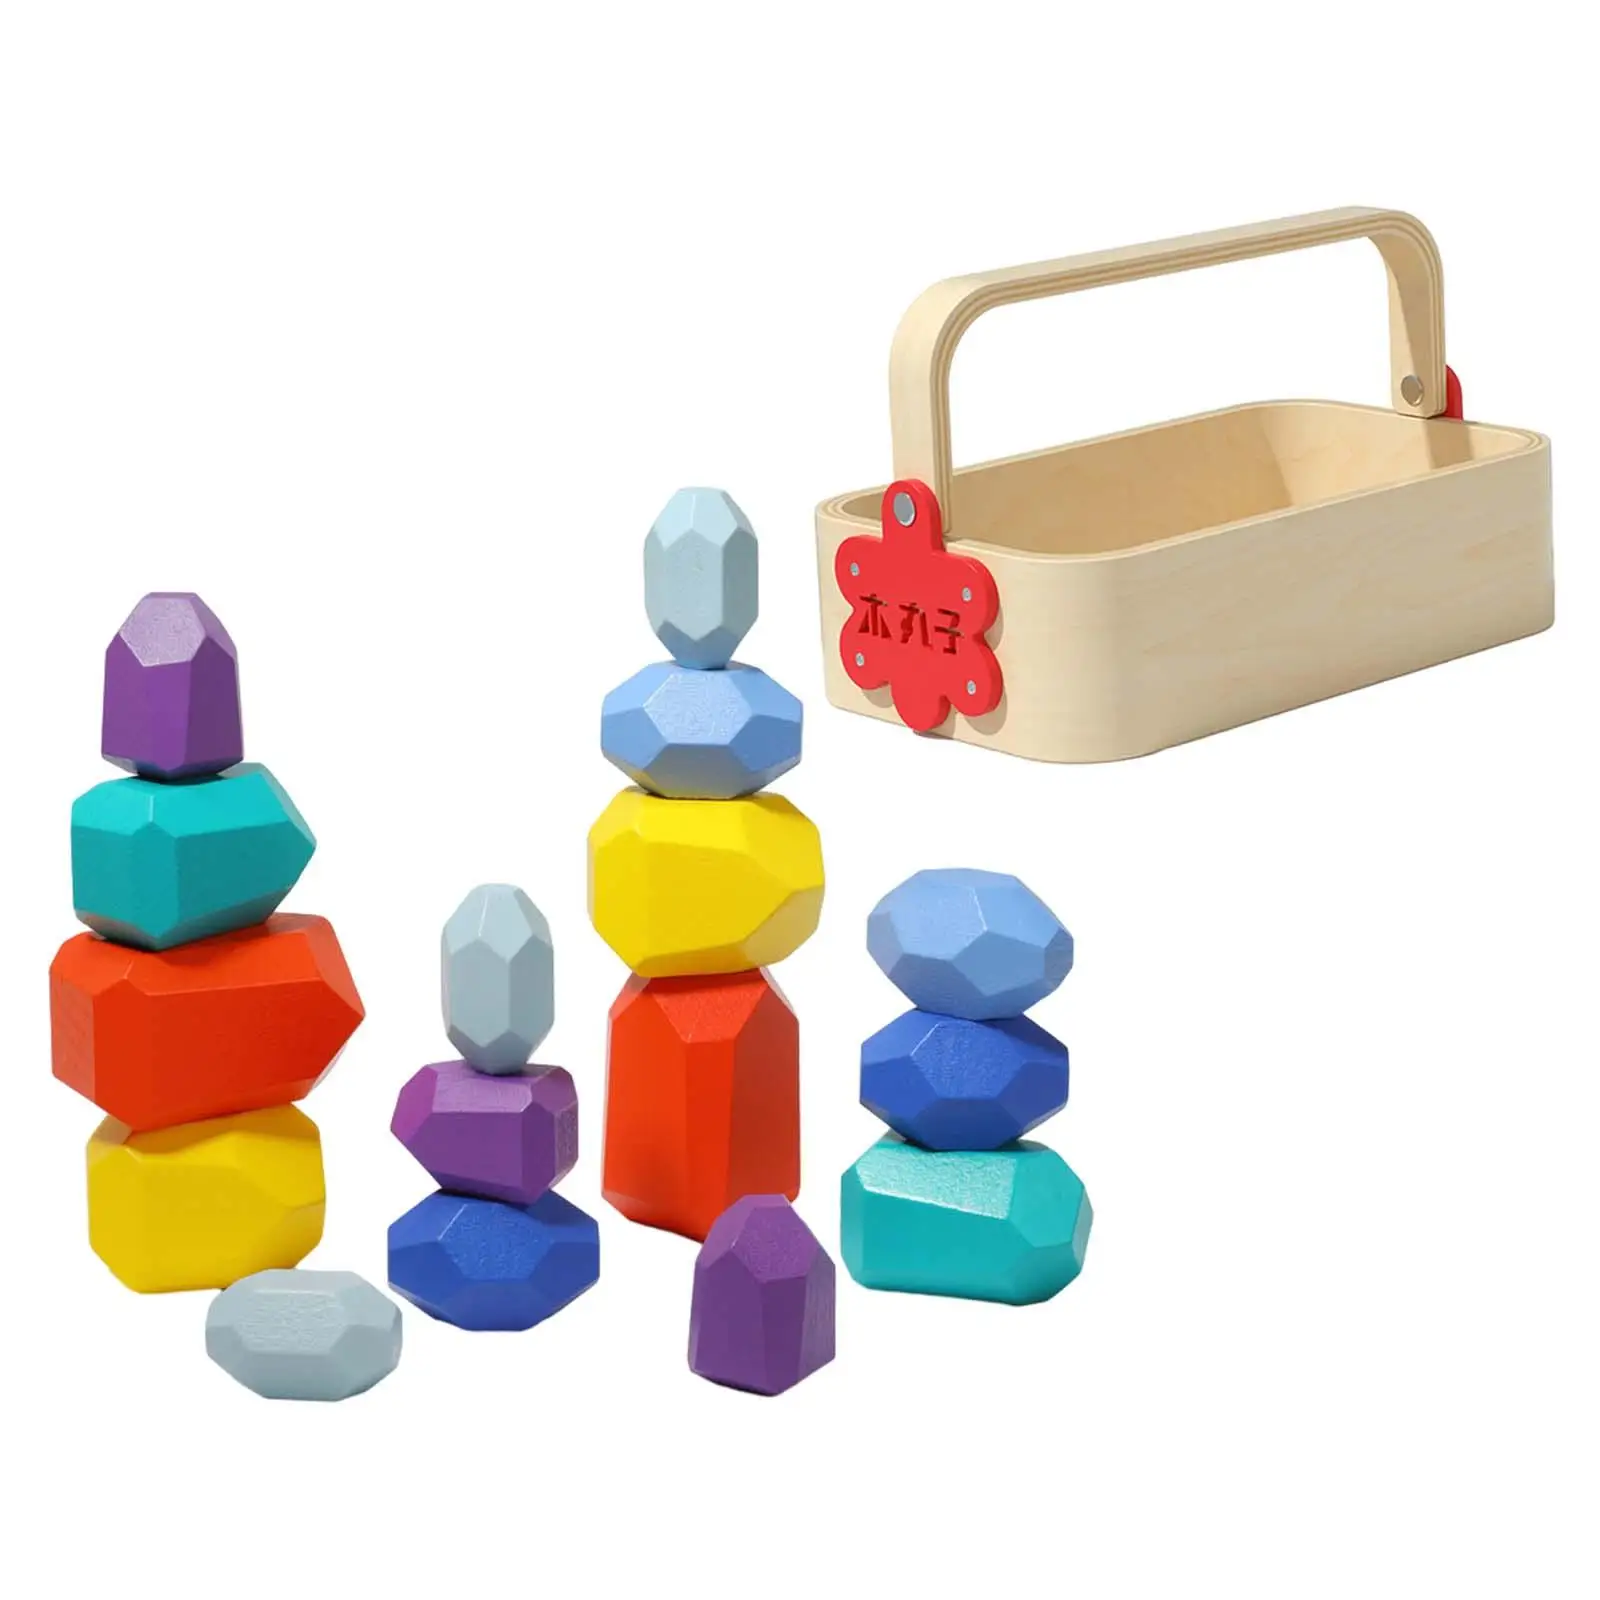 Stacking Stones Hands on Balance Training Toys Educational Toy Montessori Toys Wooden for Children Girls Boys Birthday Gifts